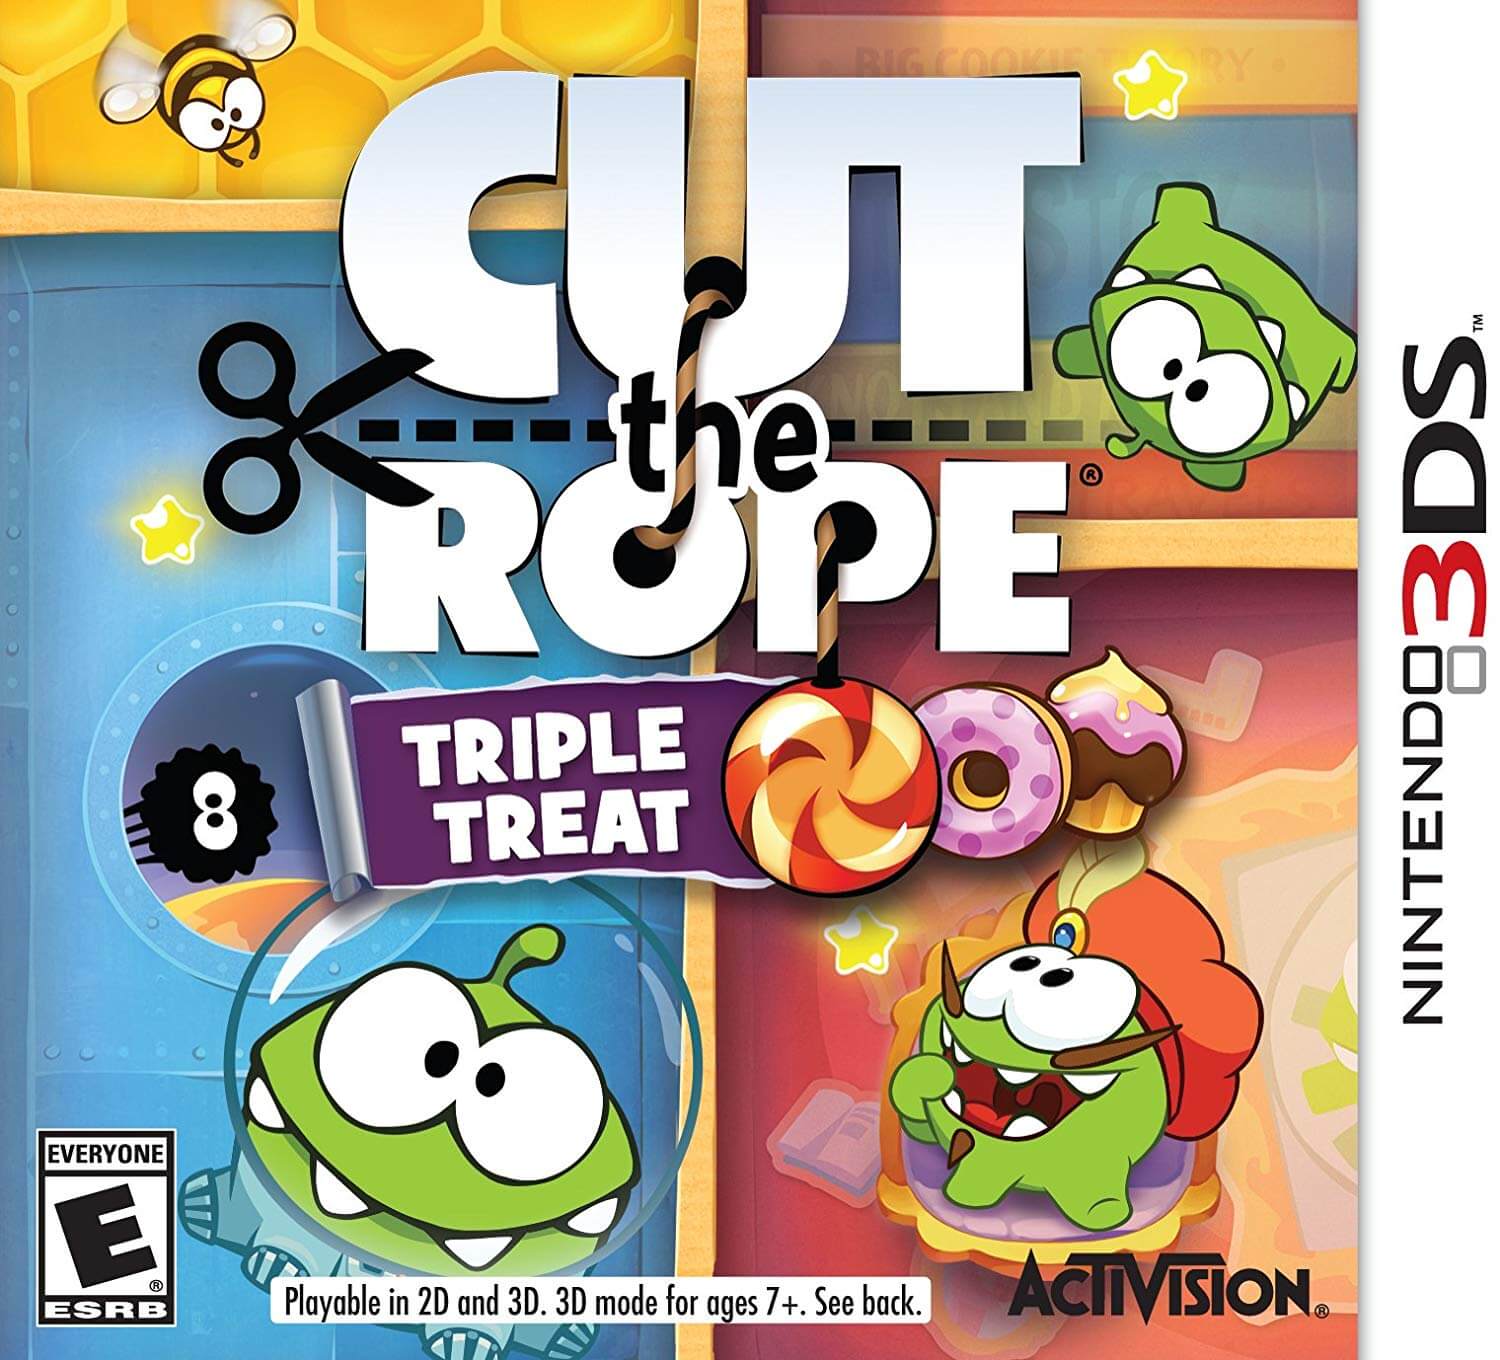 Cut the Rope: Magic Hack MOD APK Android Free Download